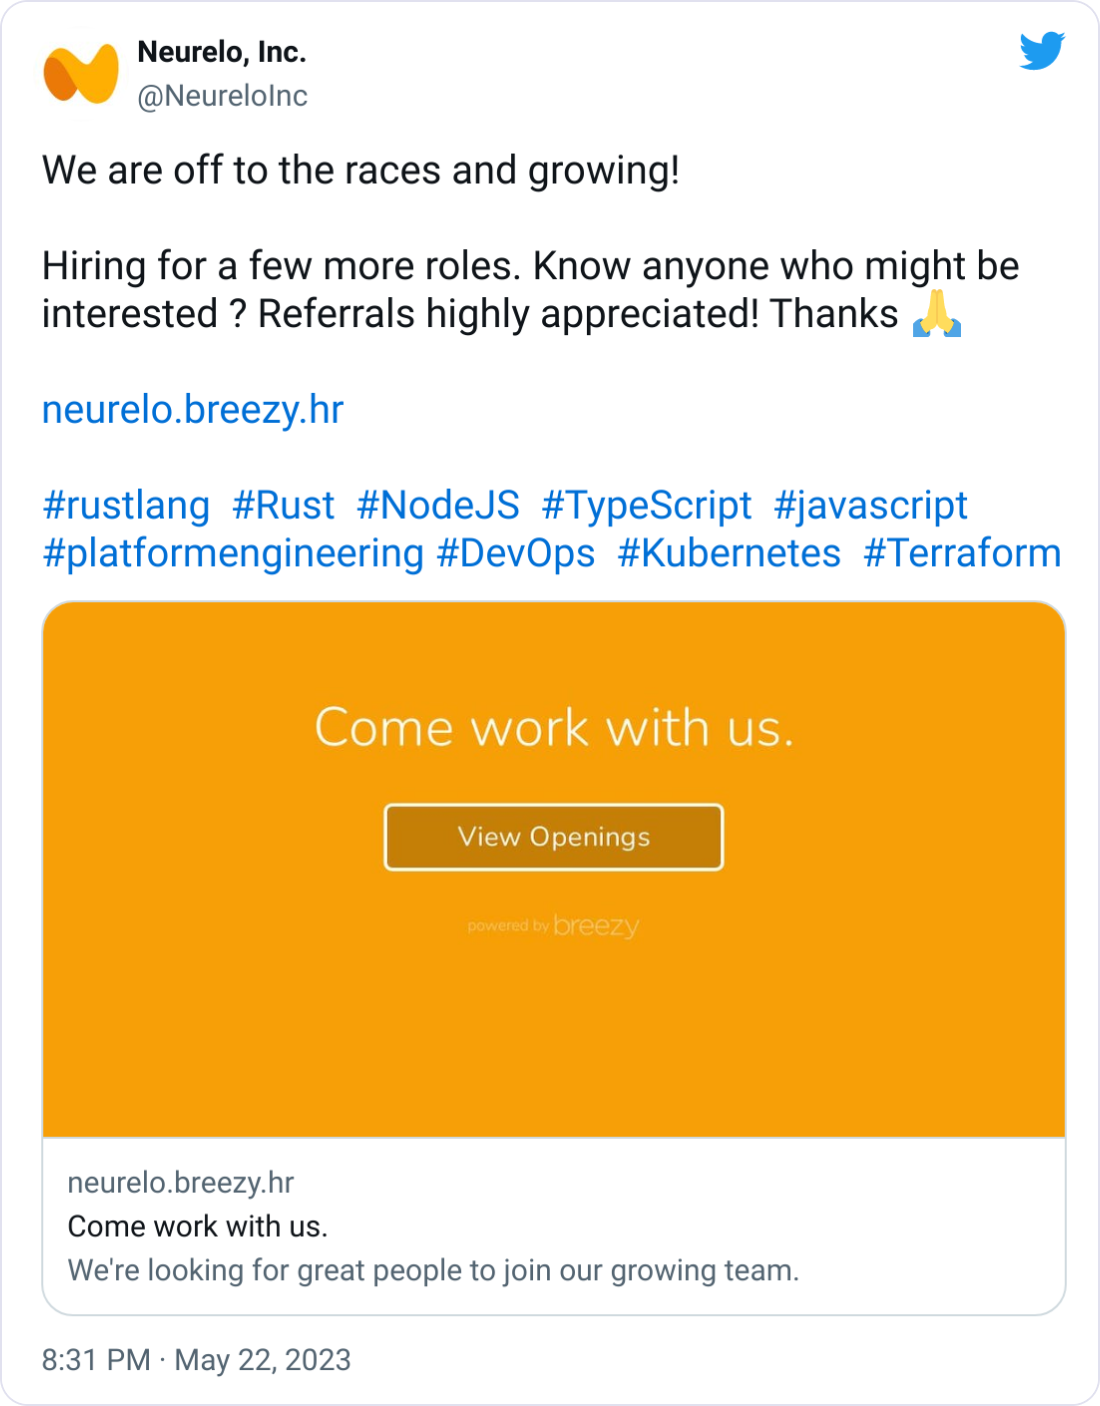  Neurelo, Inc. @NeureloInc We are off to the races and growing!   Hiring for a few more roles. Know anyone who might be interested ? Referrals highly appreciated! Thanks 🙏  https://neurelo.breezy.hr  #rustlang  #Rust  #NodeJS  #TypeScript  #javascript #platformengineering #DevOps  #Kubernetes  #Terraform